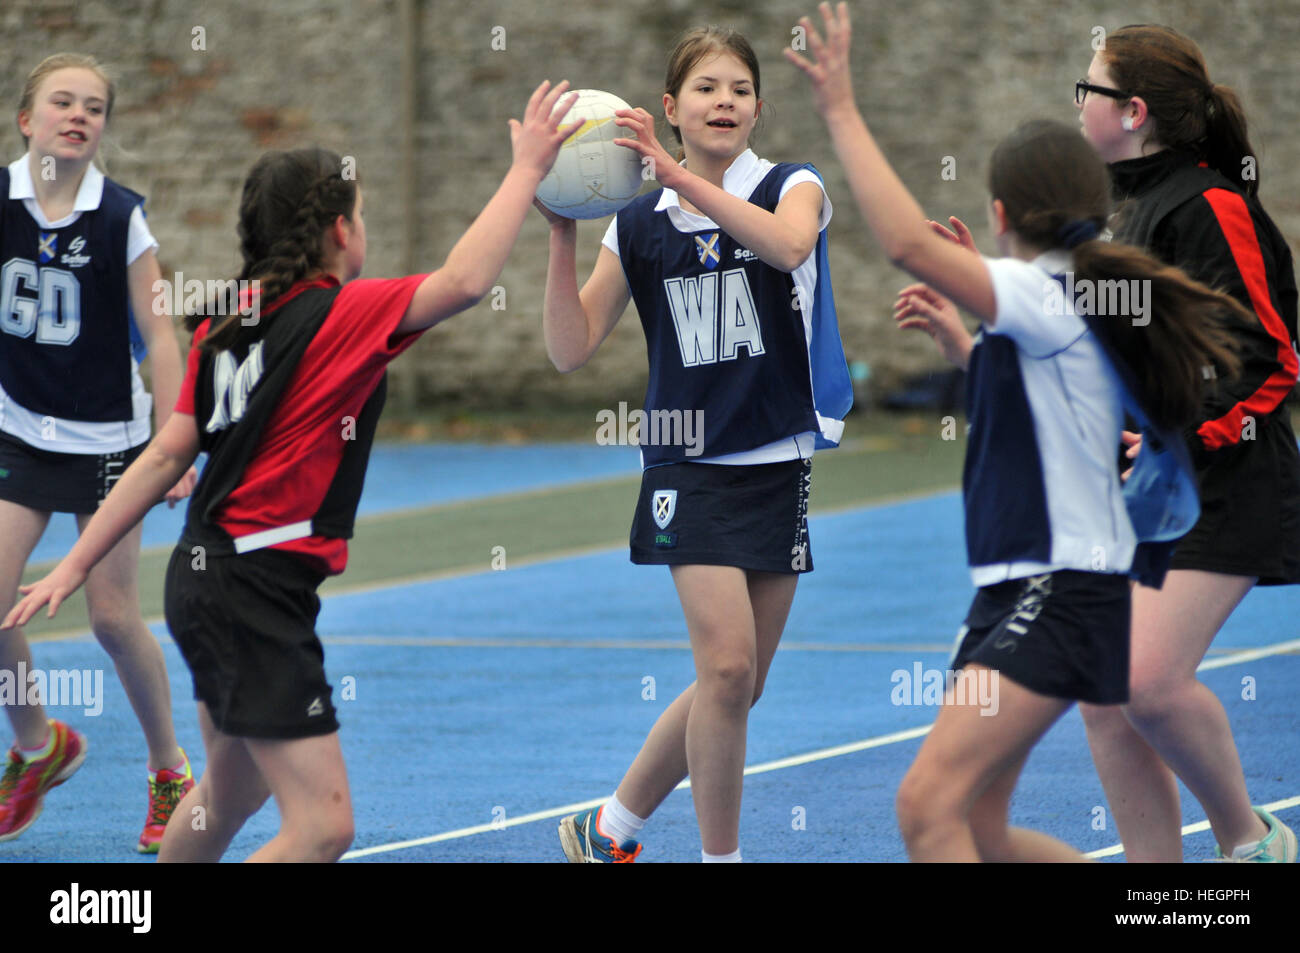 Choristers from Wells Cathedral Choir play in inter-chorister netball tournament, Wells, Somerset, UK. Stock Photo